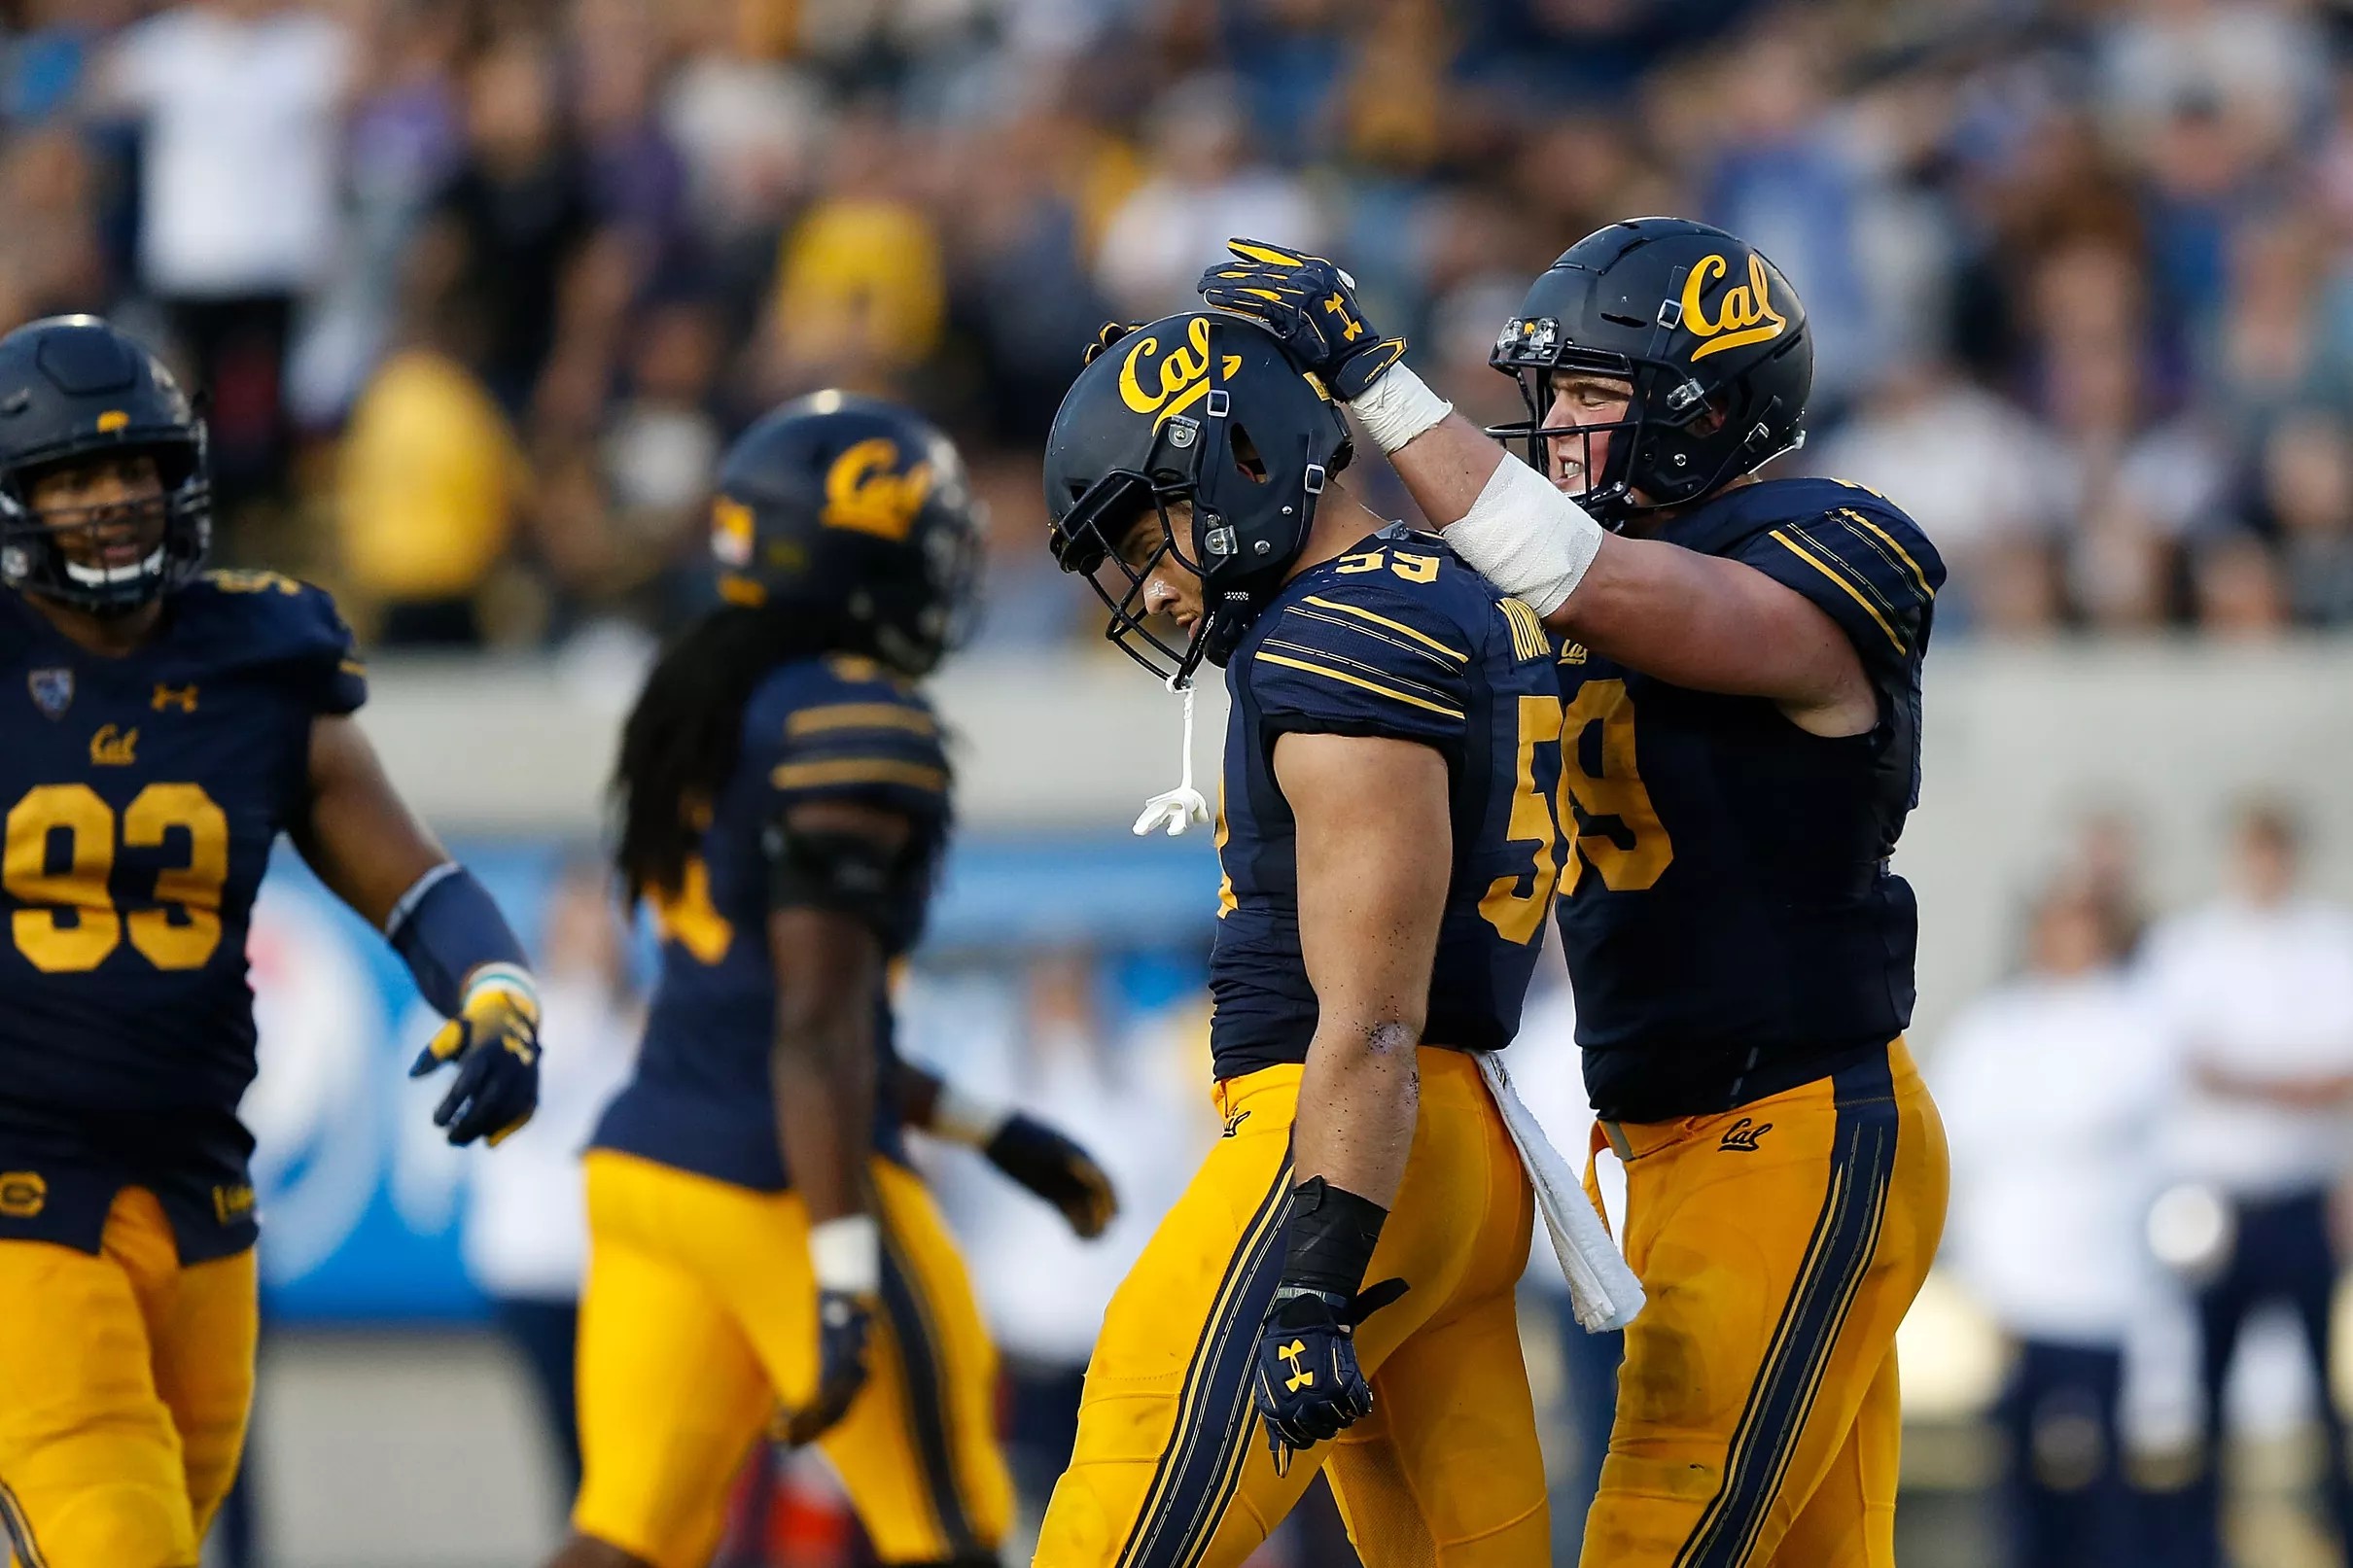 Cal gets 2 players on the All Pac12 team